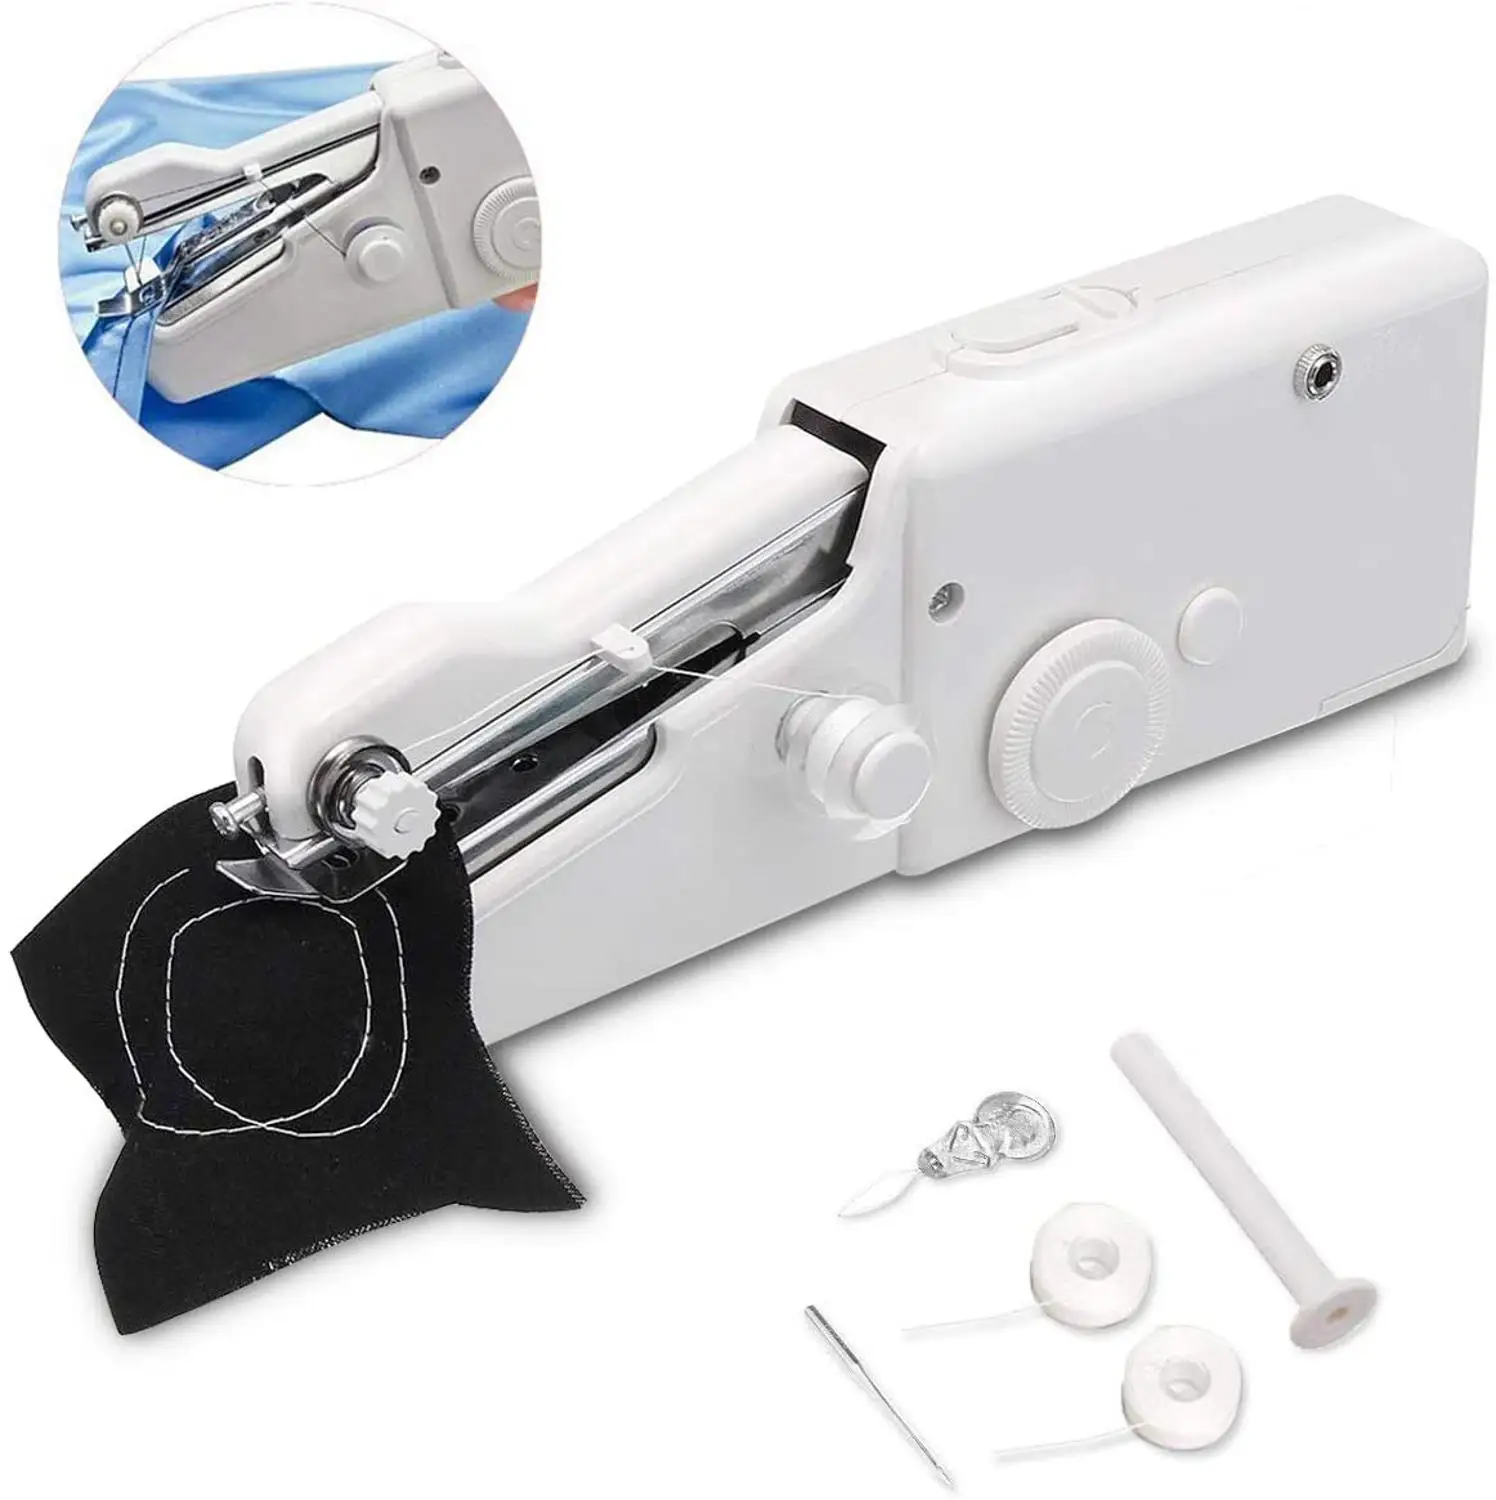 Mini Sewing Machine Home Handheld Cordless Handy Stitch Electric Sewing Machine With Sew Kits For Fabric Clothing Droshipping